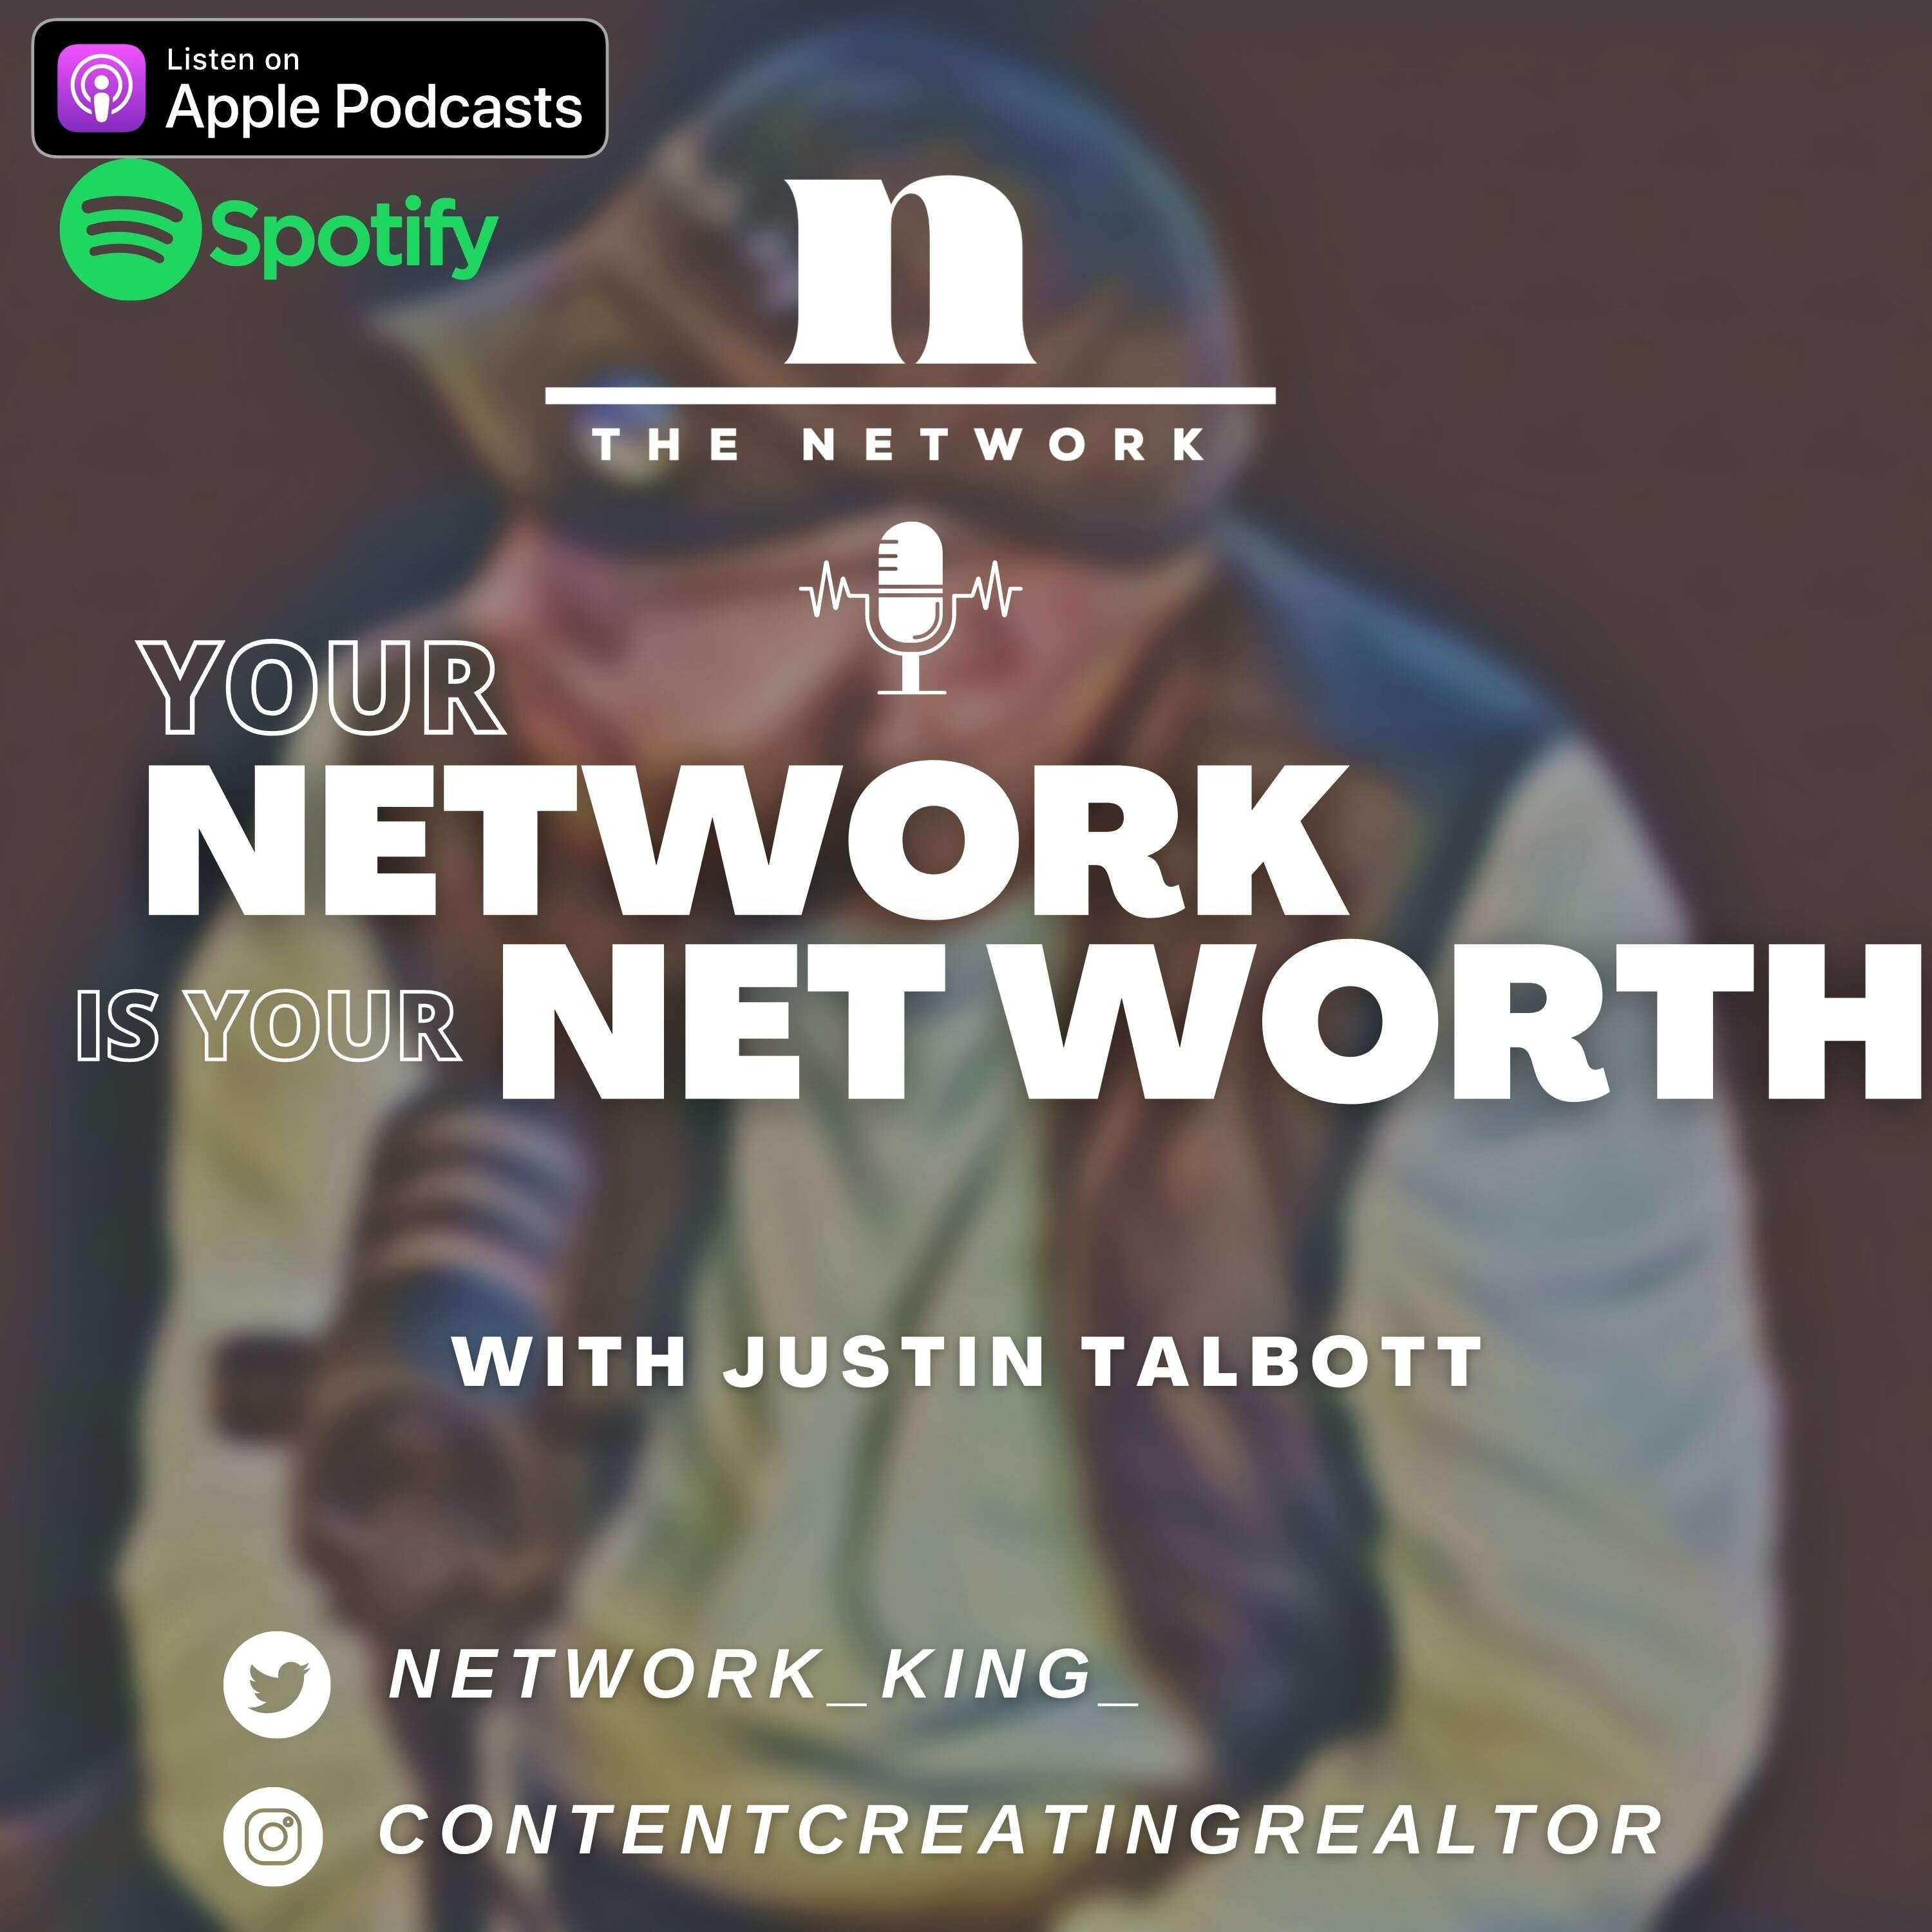 The Network Podcast